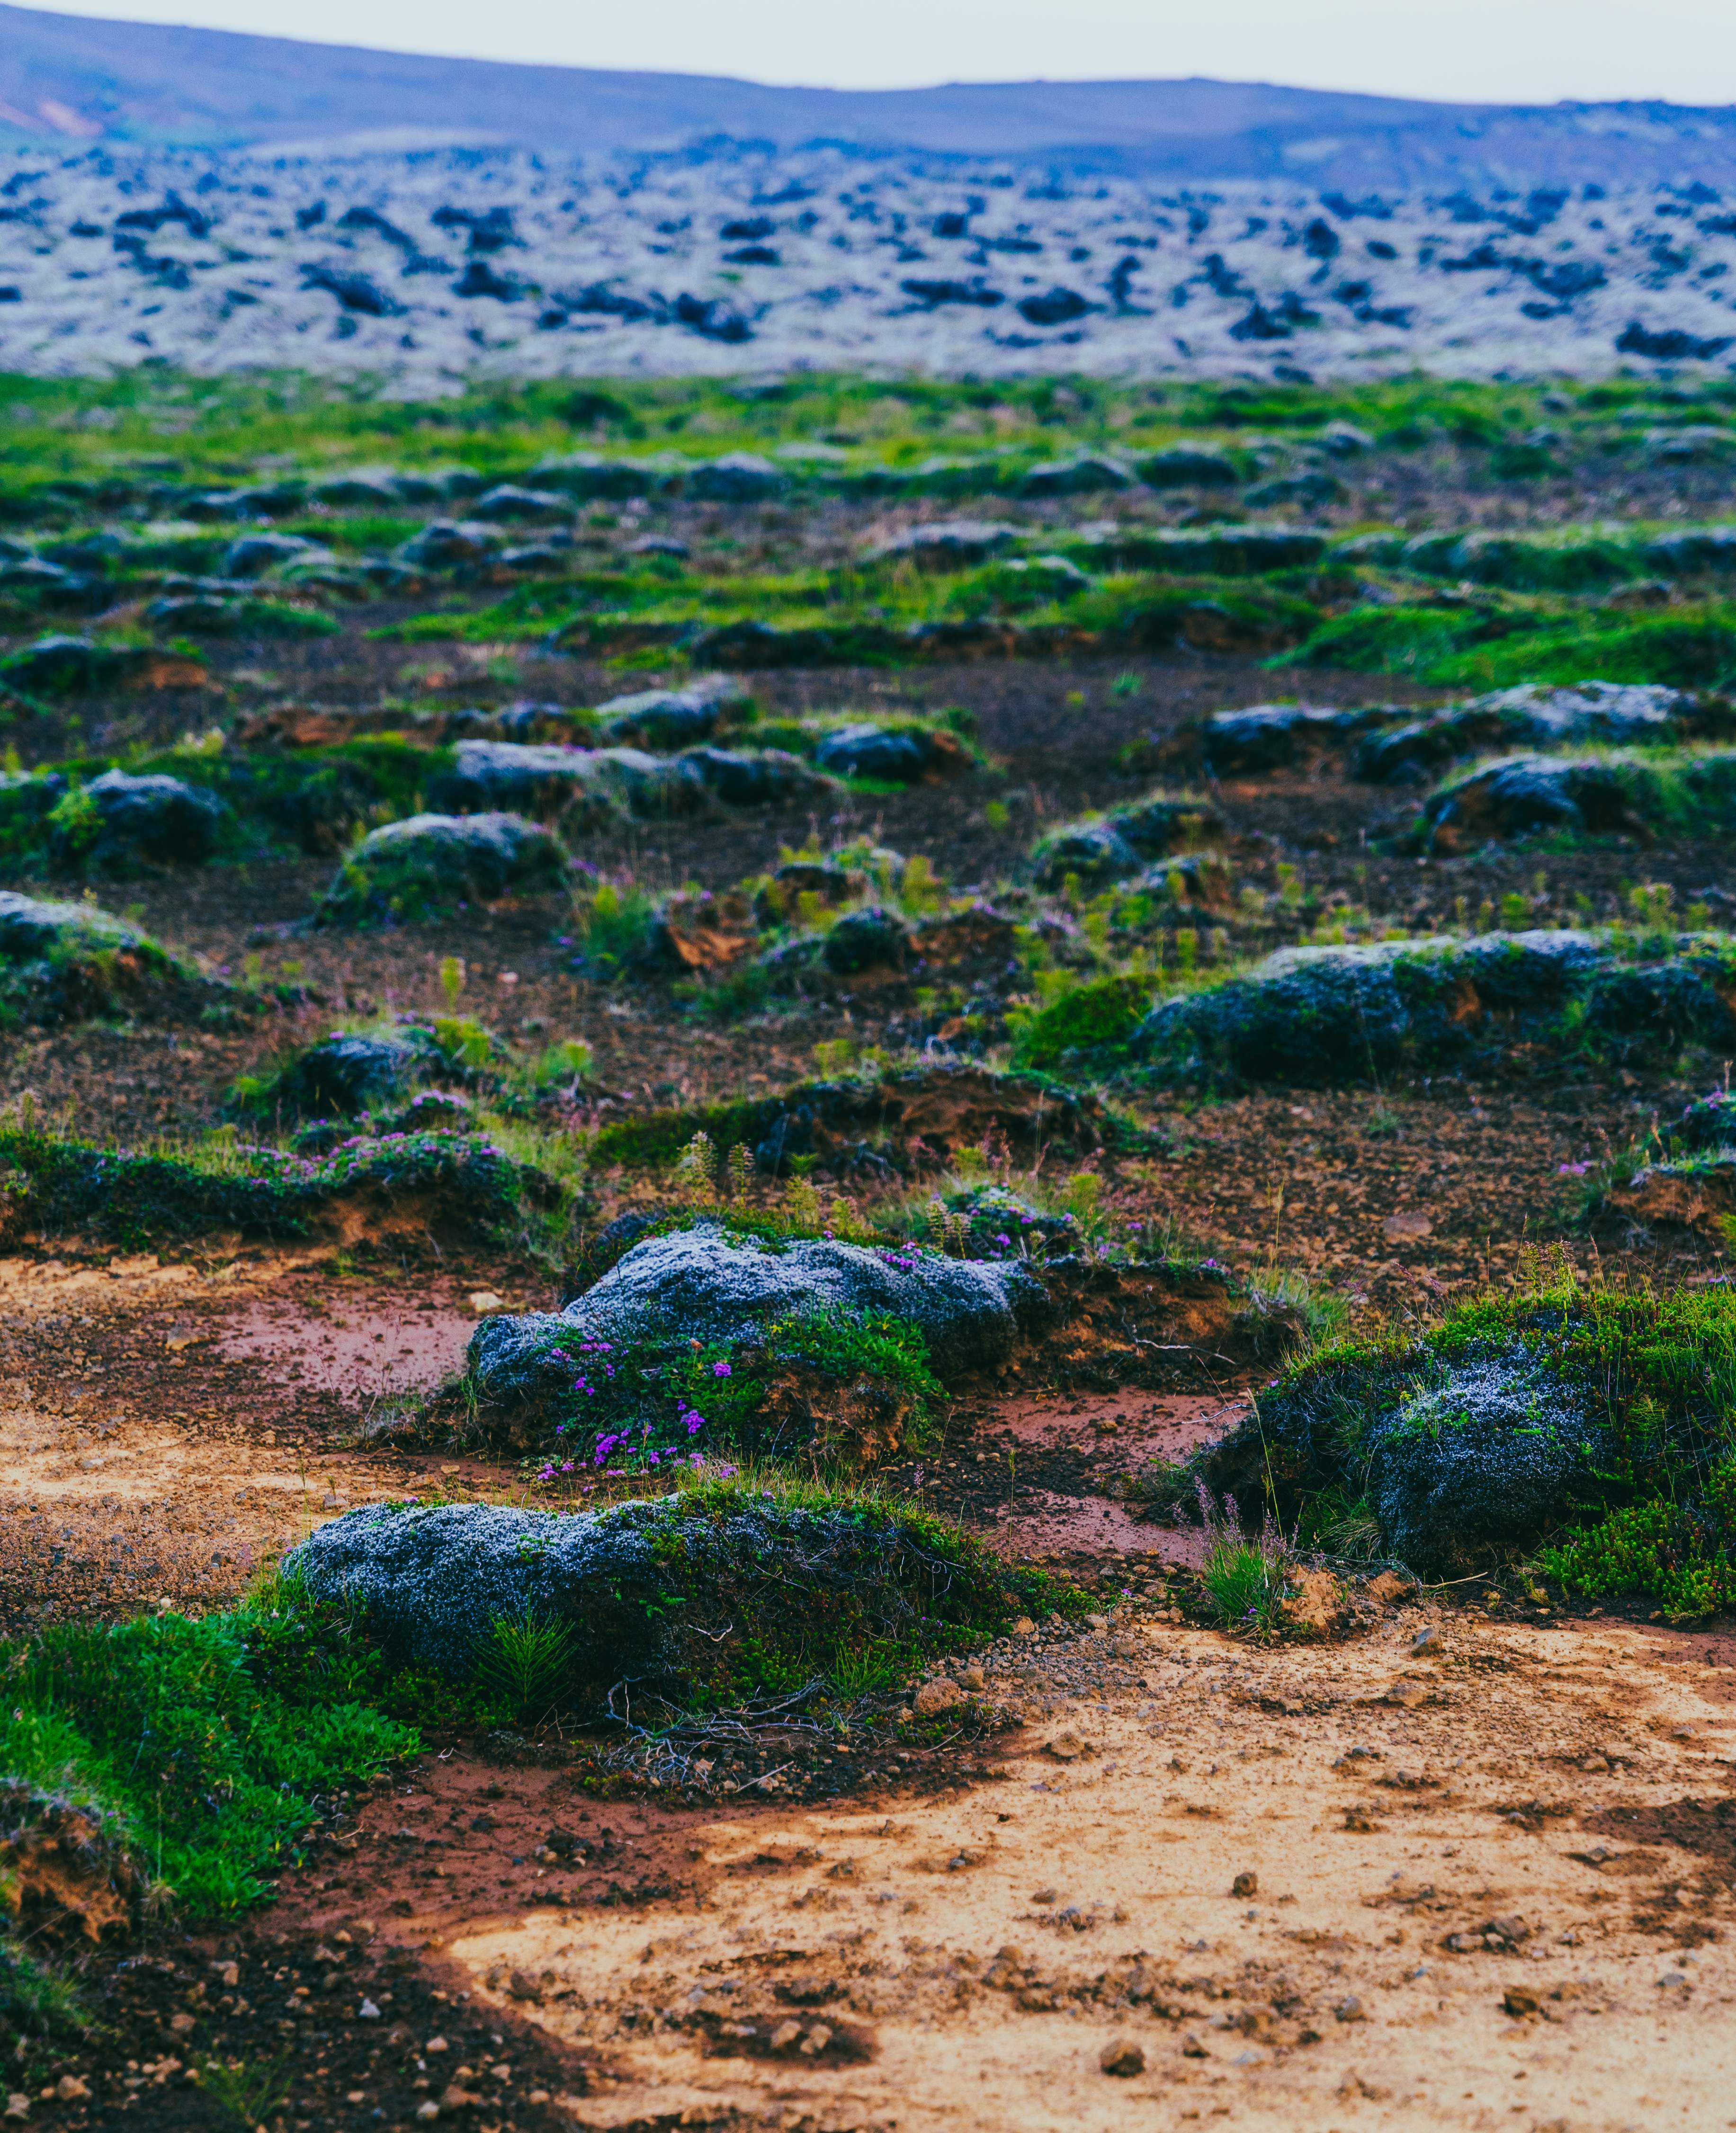 Small 'Islands' of moss and grass spread over a dry, arid surface, Iceland